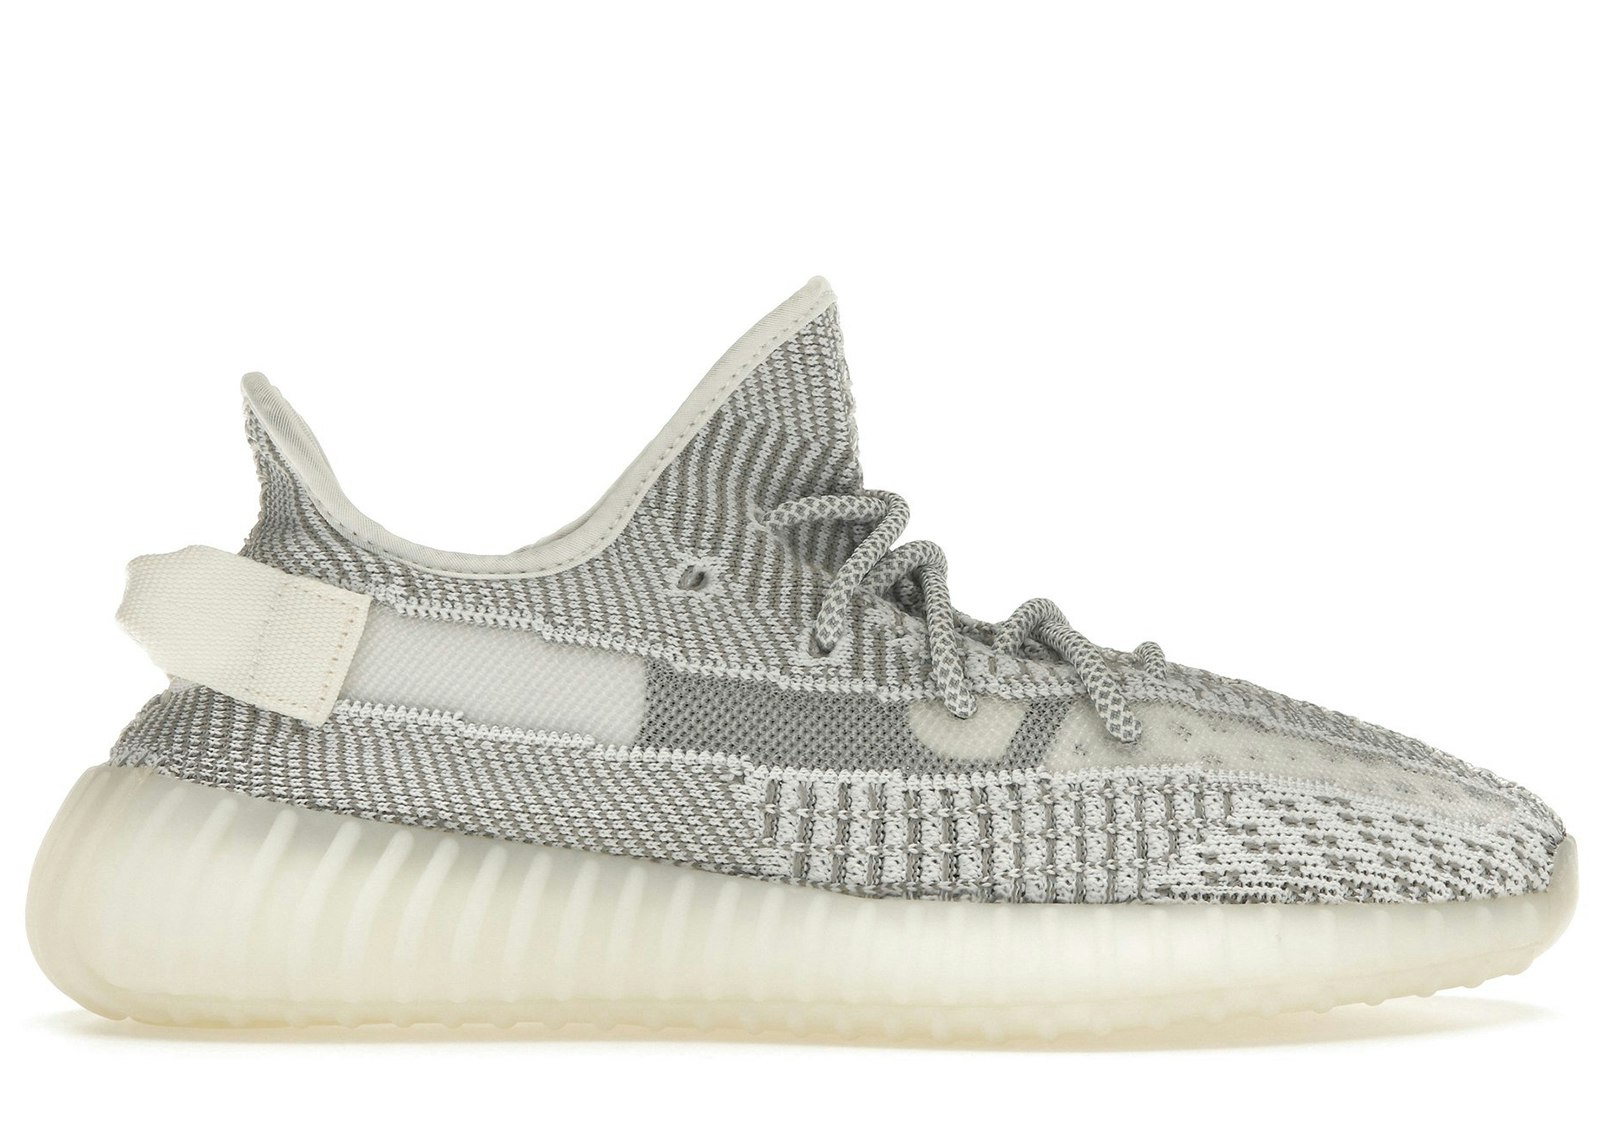 adidas Yeezy Boost 350 V2 Static (Non-Reflective) - EF2905 - US